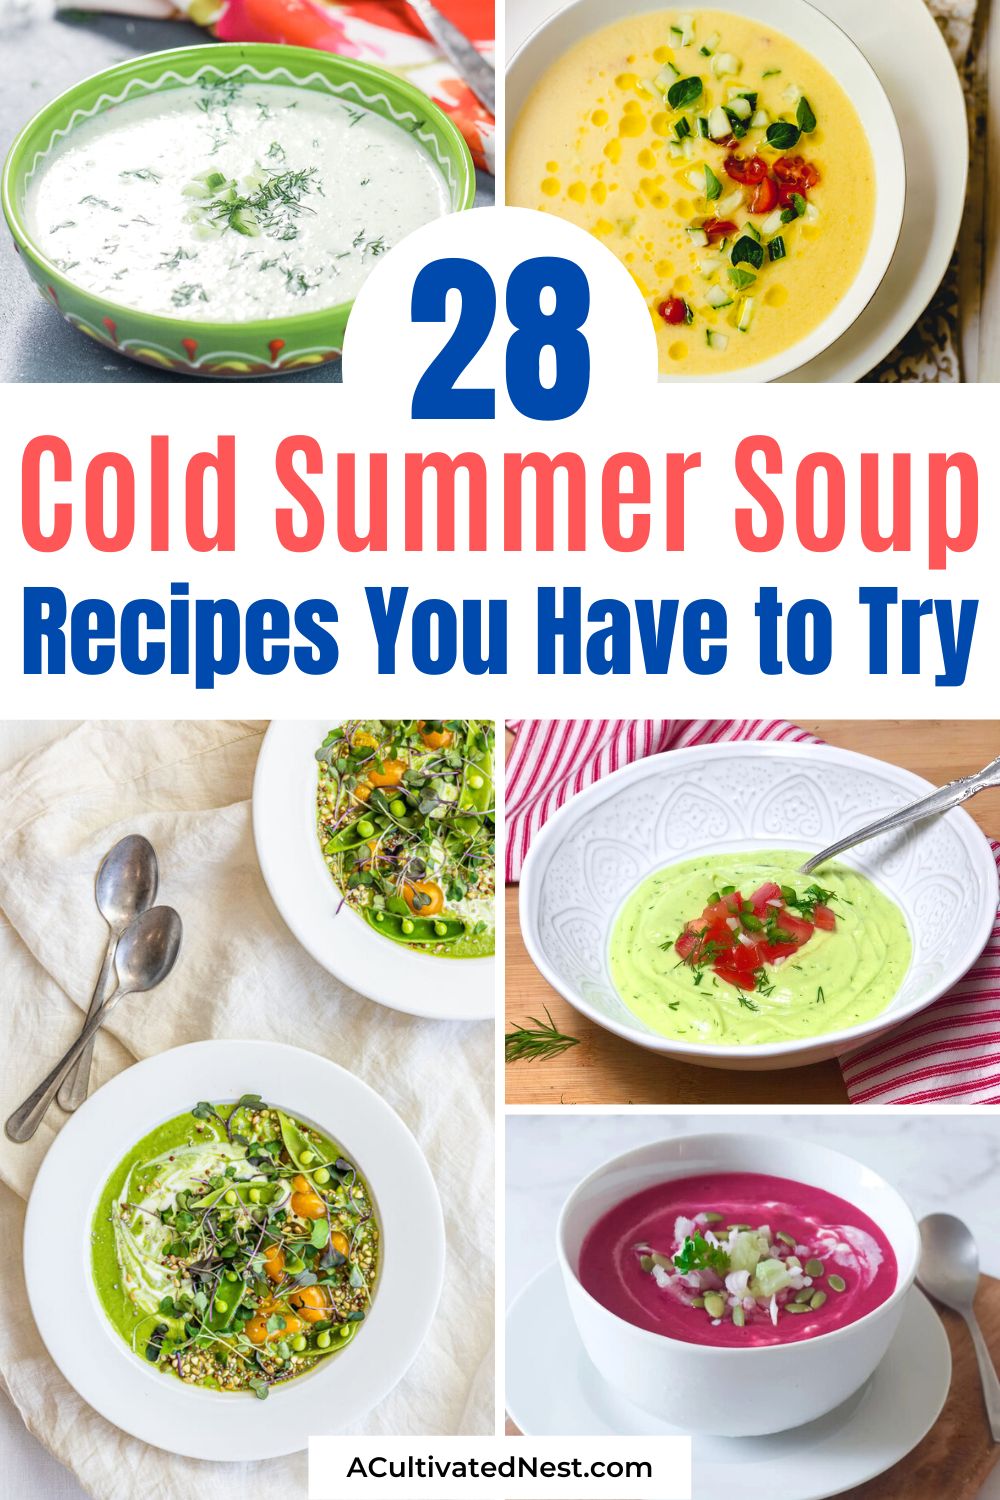 28 Cool Summer Soup Recipes to Try- Want a delicious and refreshing meal this summer? Then you should try one of these cool summer soup recipes! Cold soups are a unique and tasty treat! | #coolSoups #soupRecipes #summerRecipes #recipes #ACultivatedNest